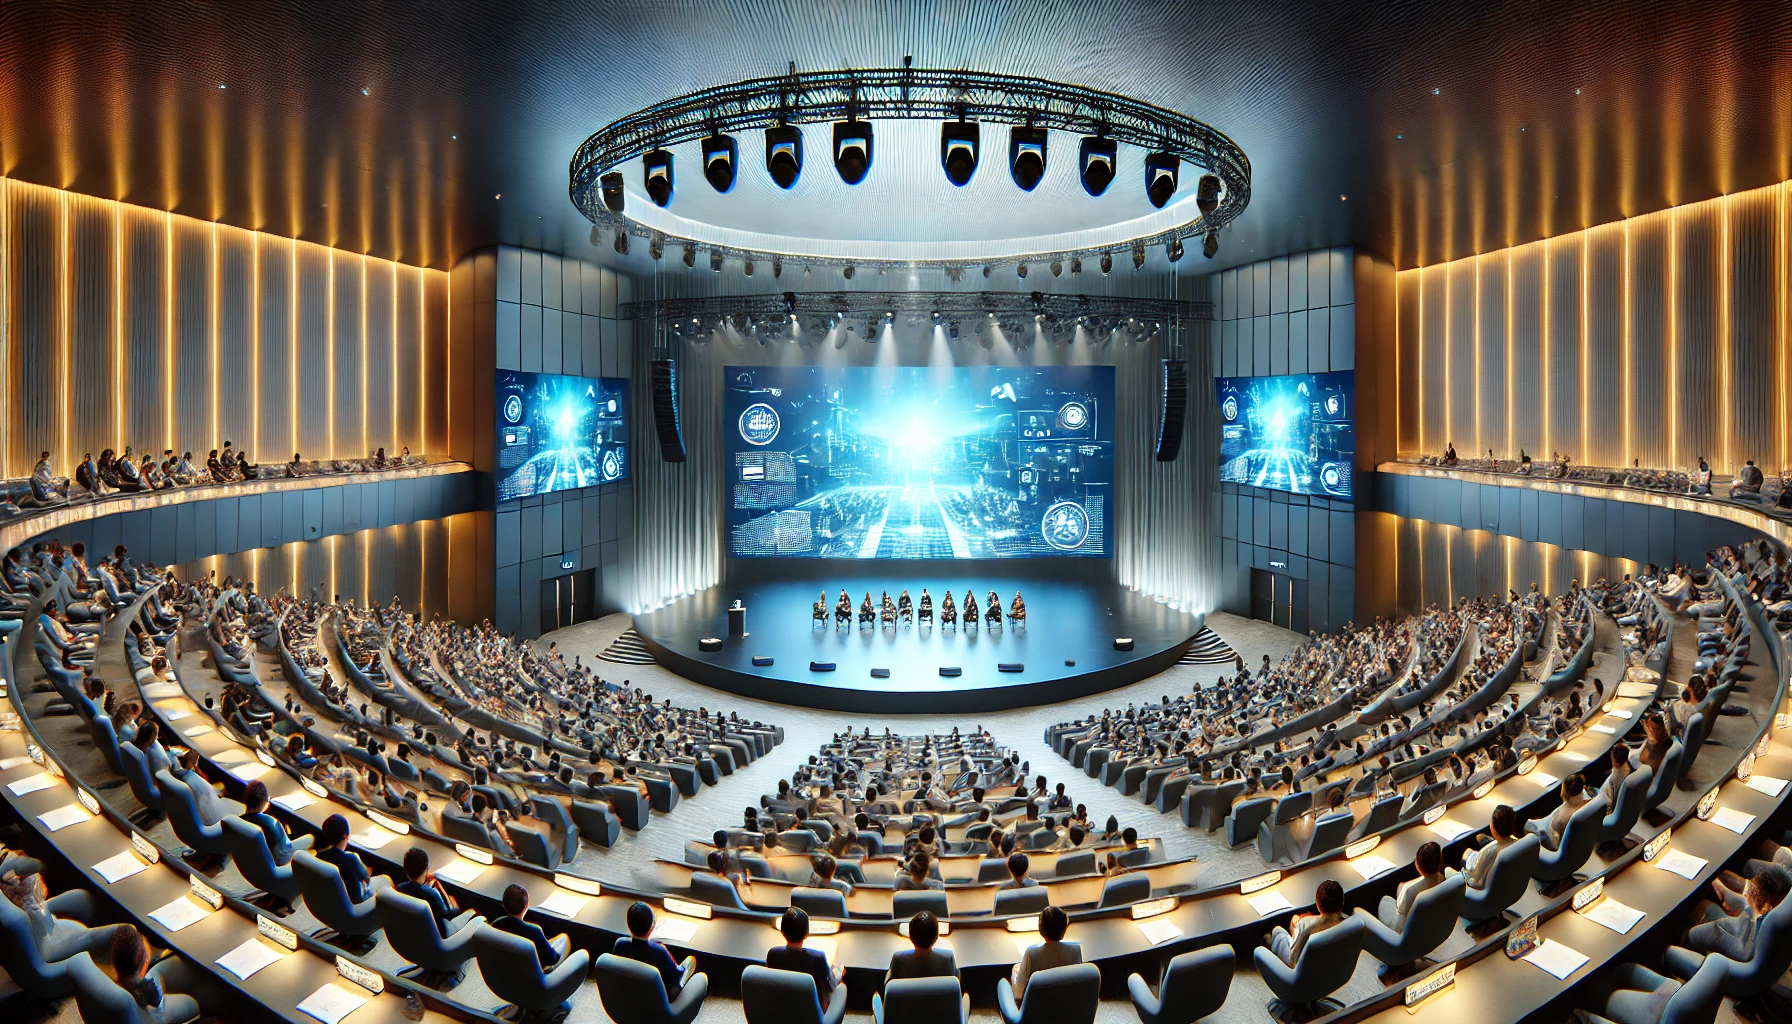 DALL·E 2024 07 26 16.53.59 A modern auditorium equipped with high definition projectors and large format screens displaying a clear vibrant image. The stage is well lit with in